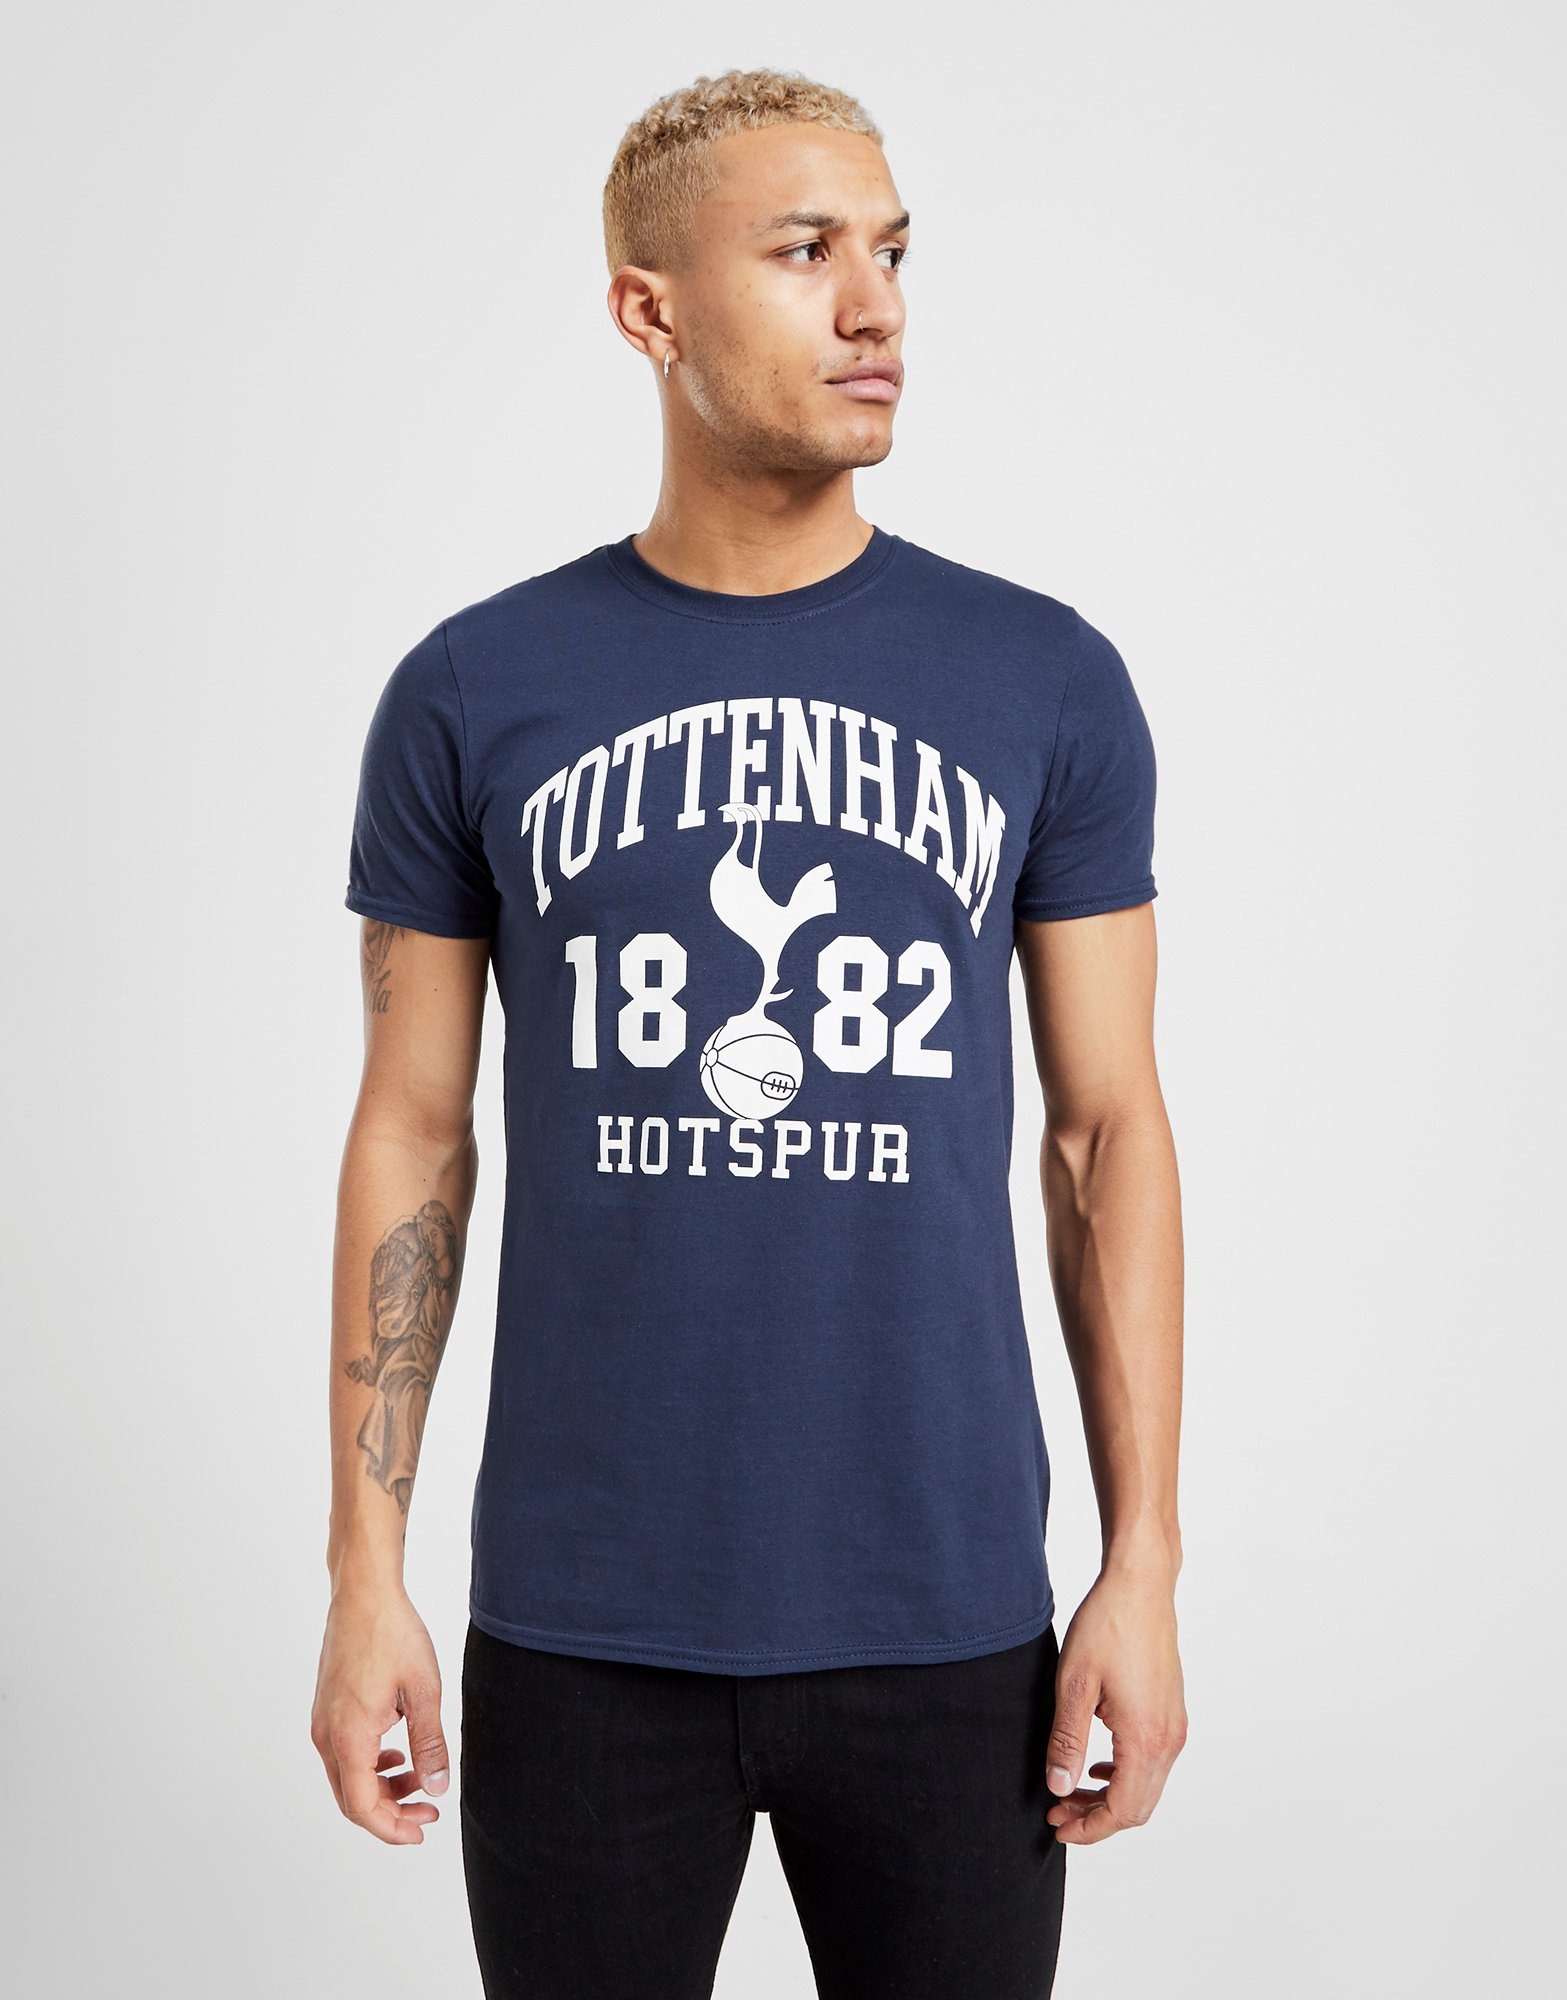  Tottenham Hotspur FC Since 1882 Authentic EPL White T-Shirt -  UK Imported : Sports & Outdoors